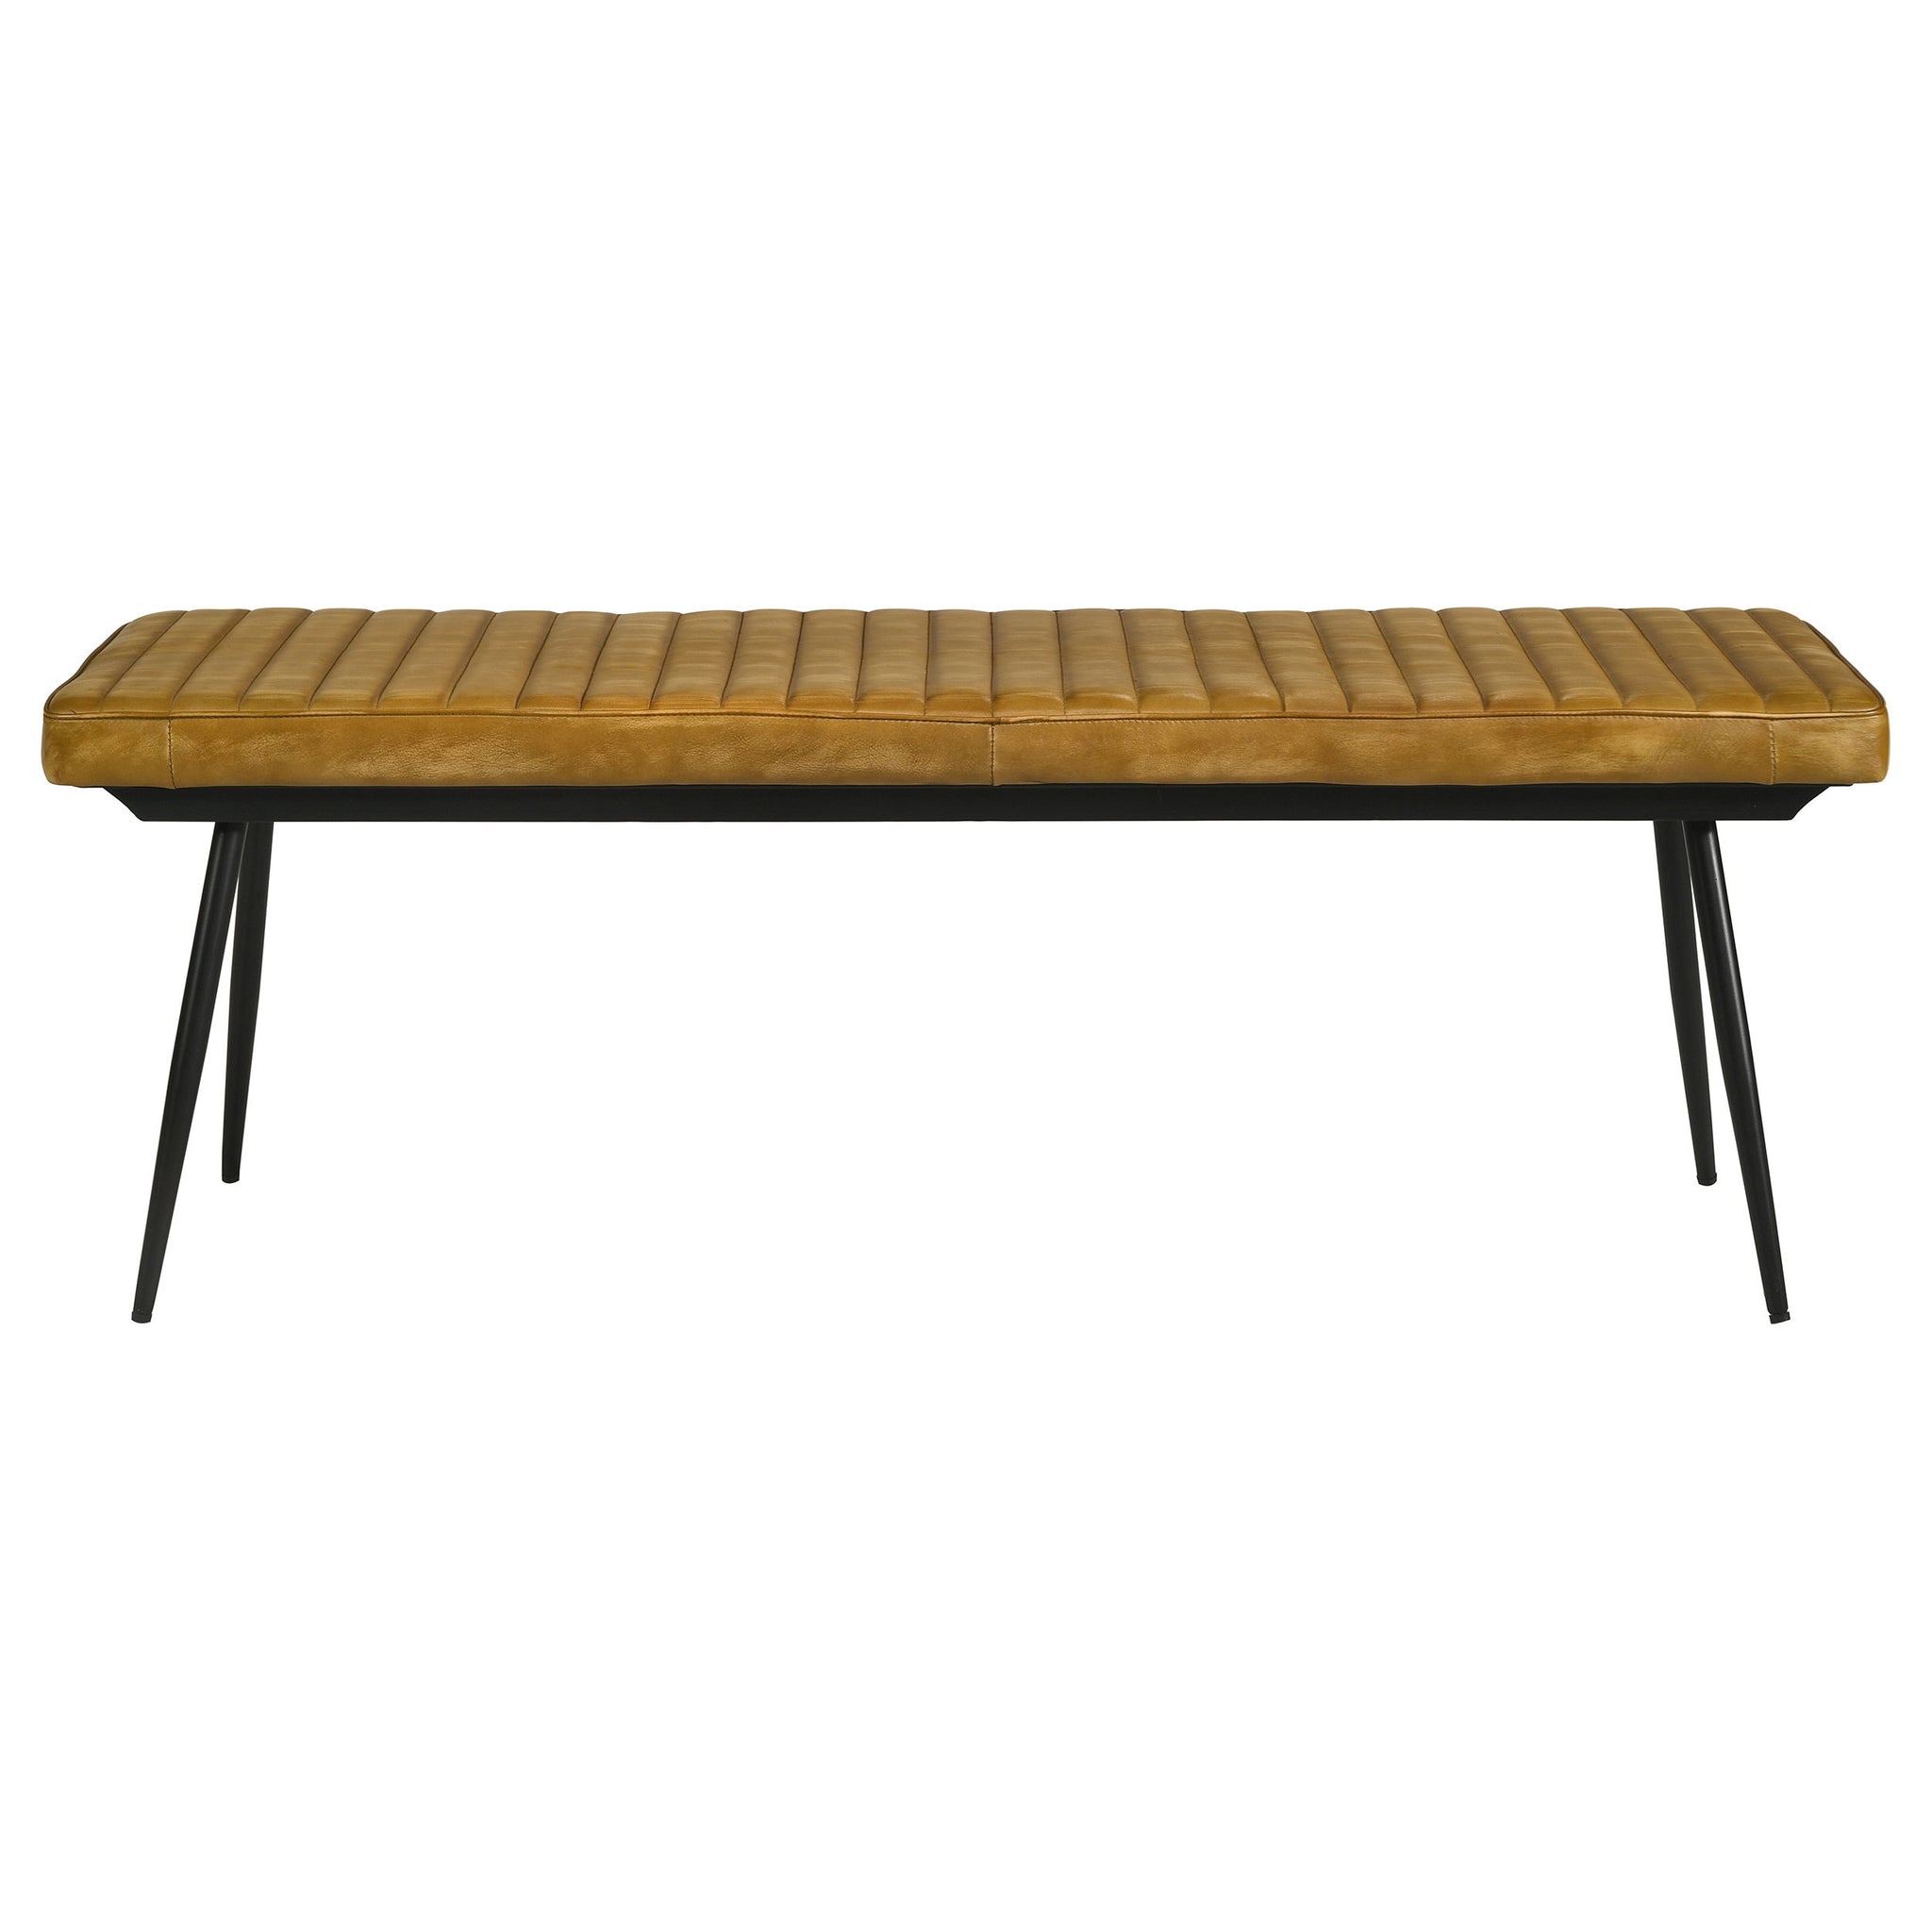 Camel and Black Tufted Cushion Side Bench brown-dining room-industrial-dining